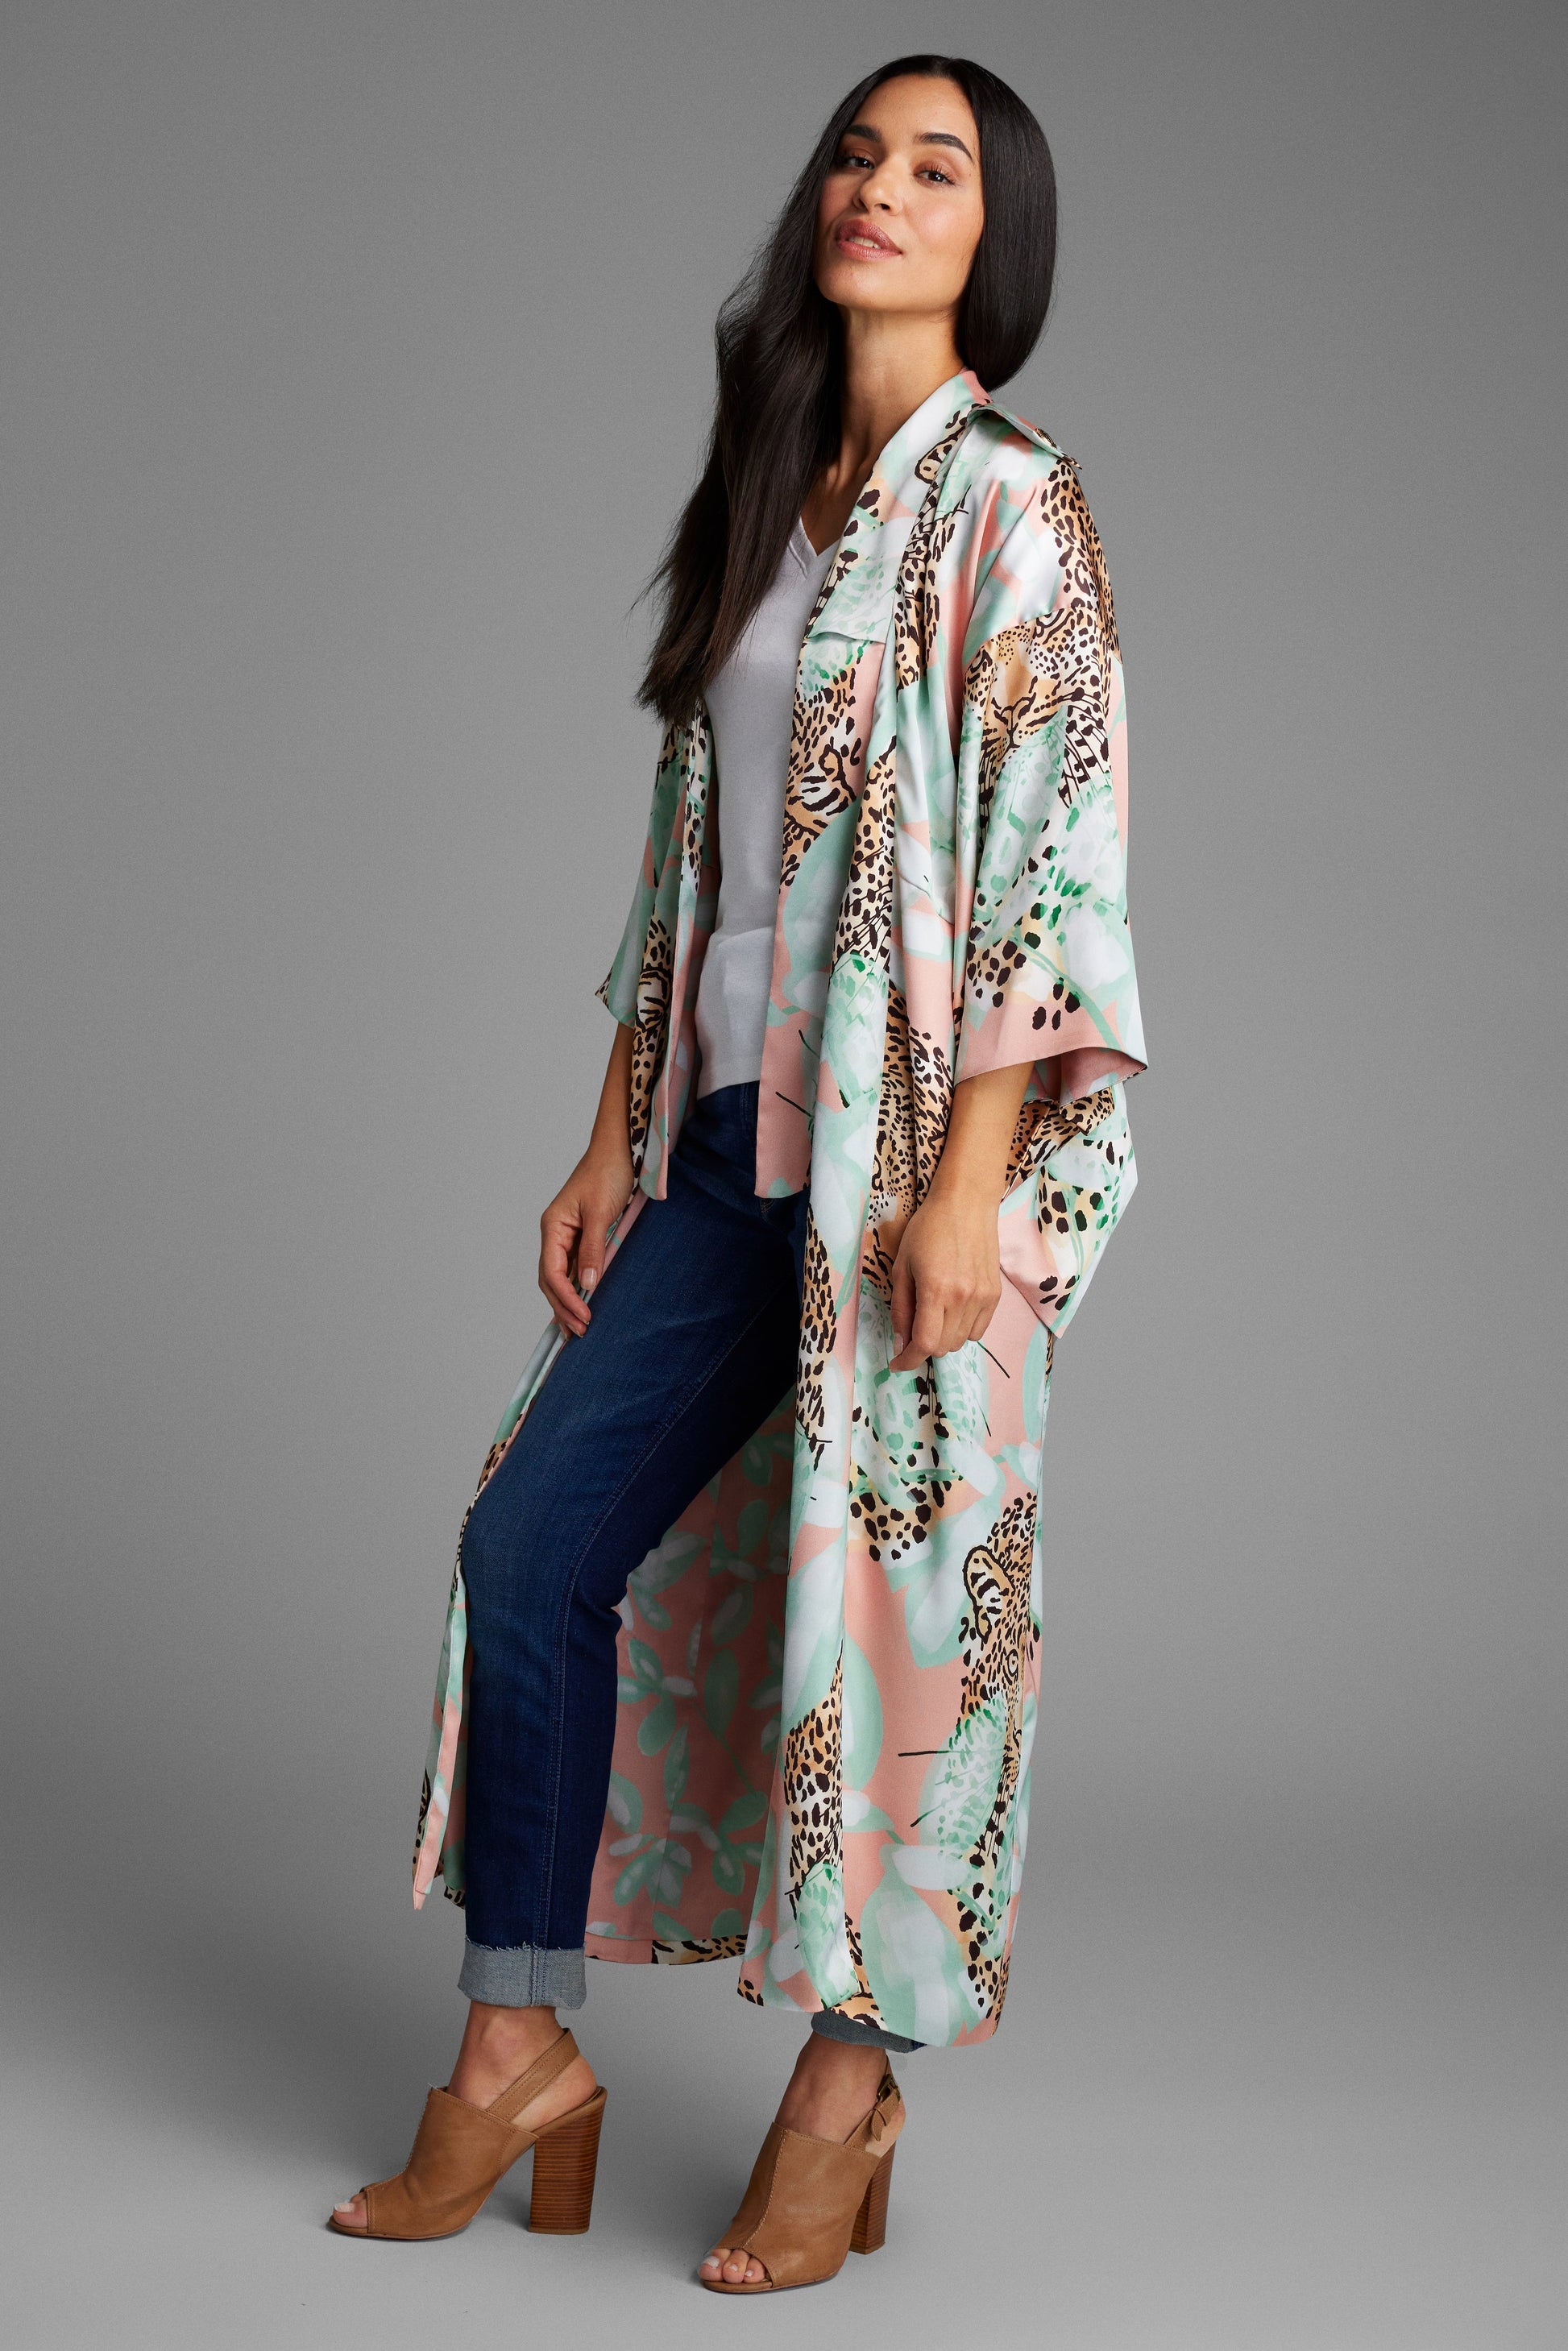 Woman wearing an all over tropical animal print kimono duster with pockets made from recycled materials